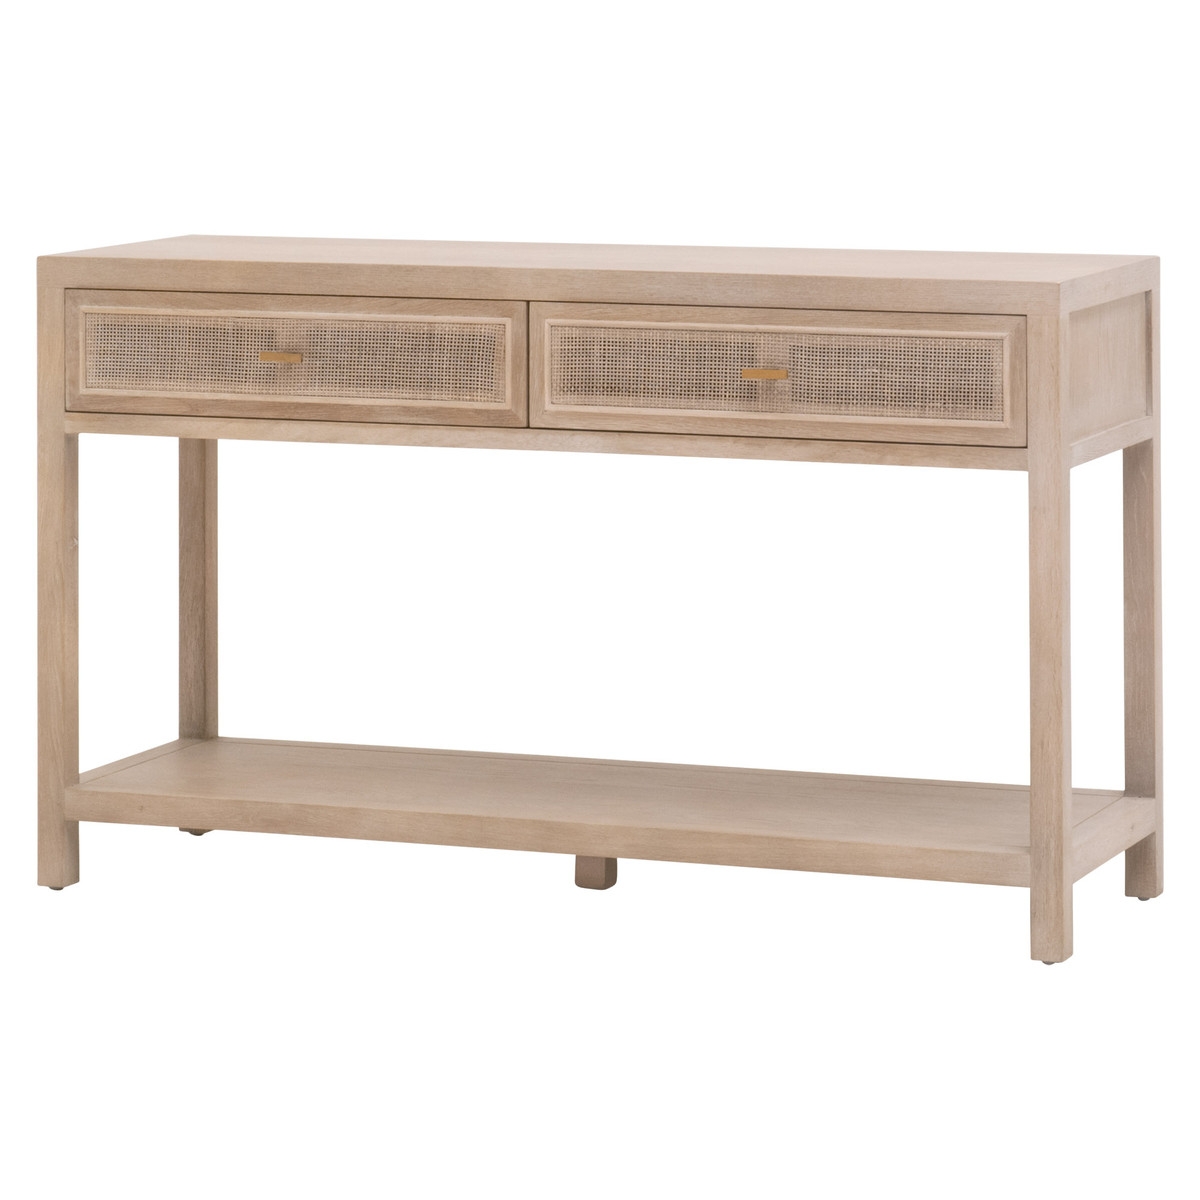 Cane 2-Drawer Entry Console - Image 2